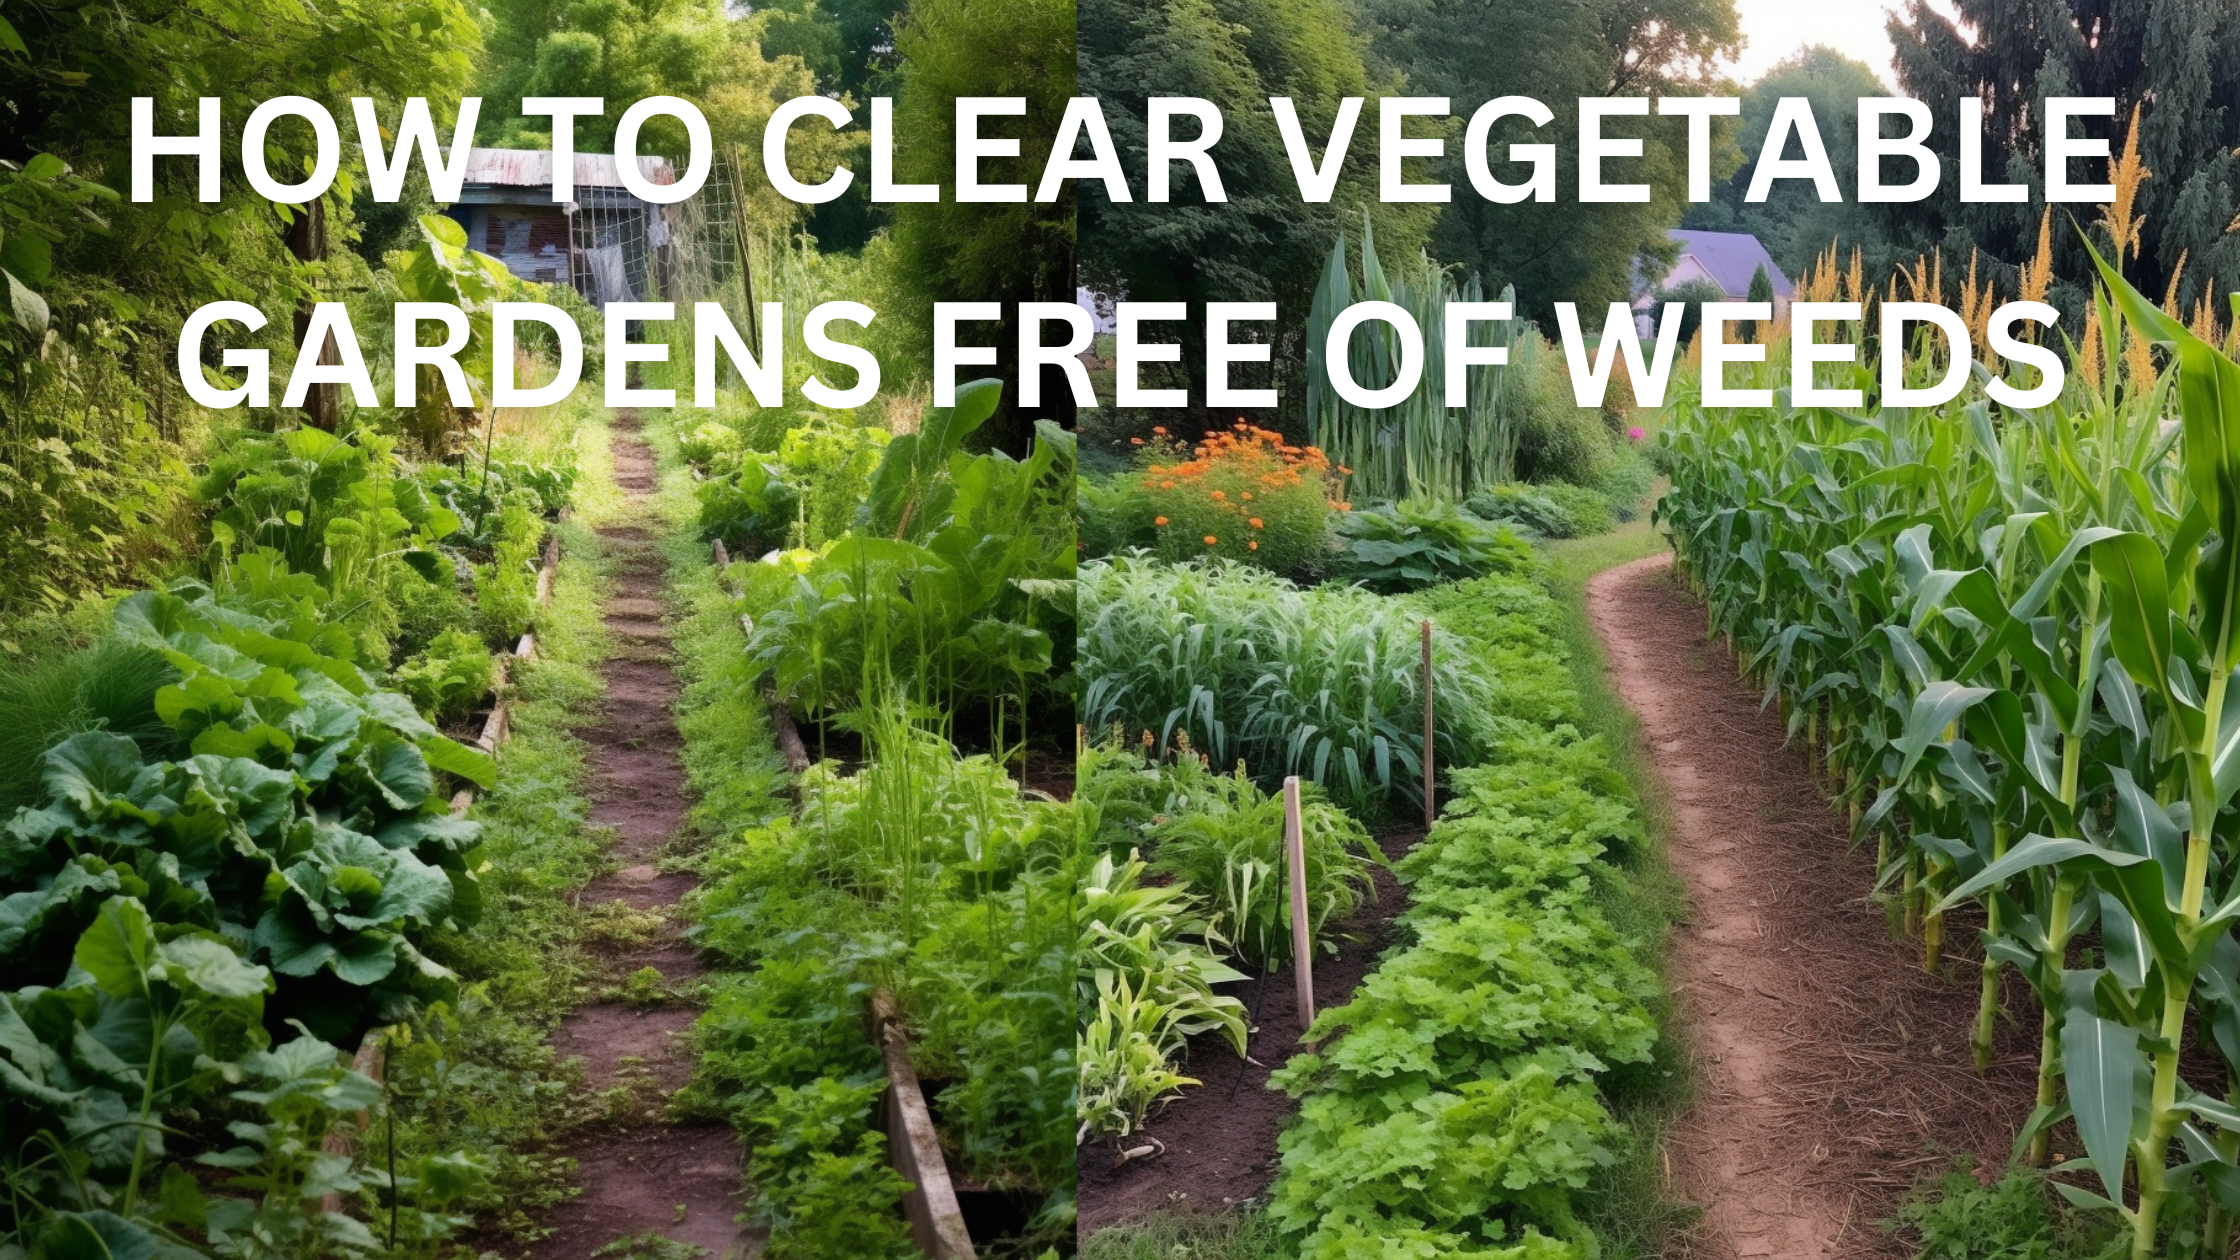 How to Clear a Vegetable Garden Full of Weeds